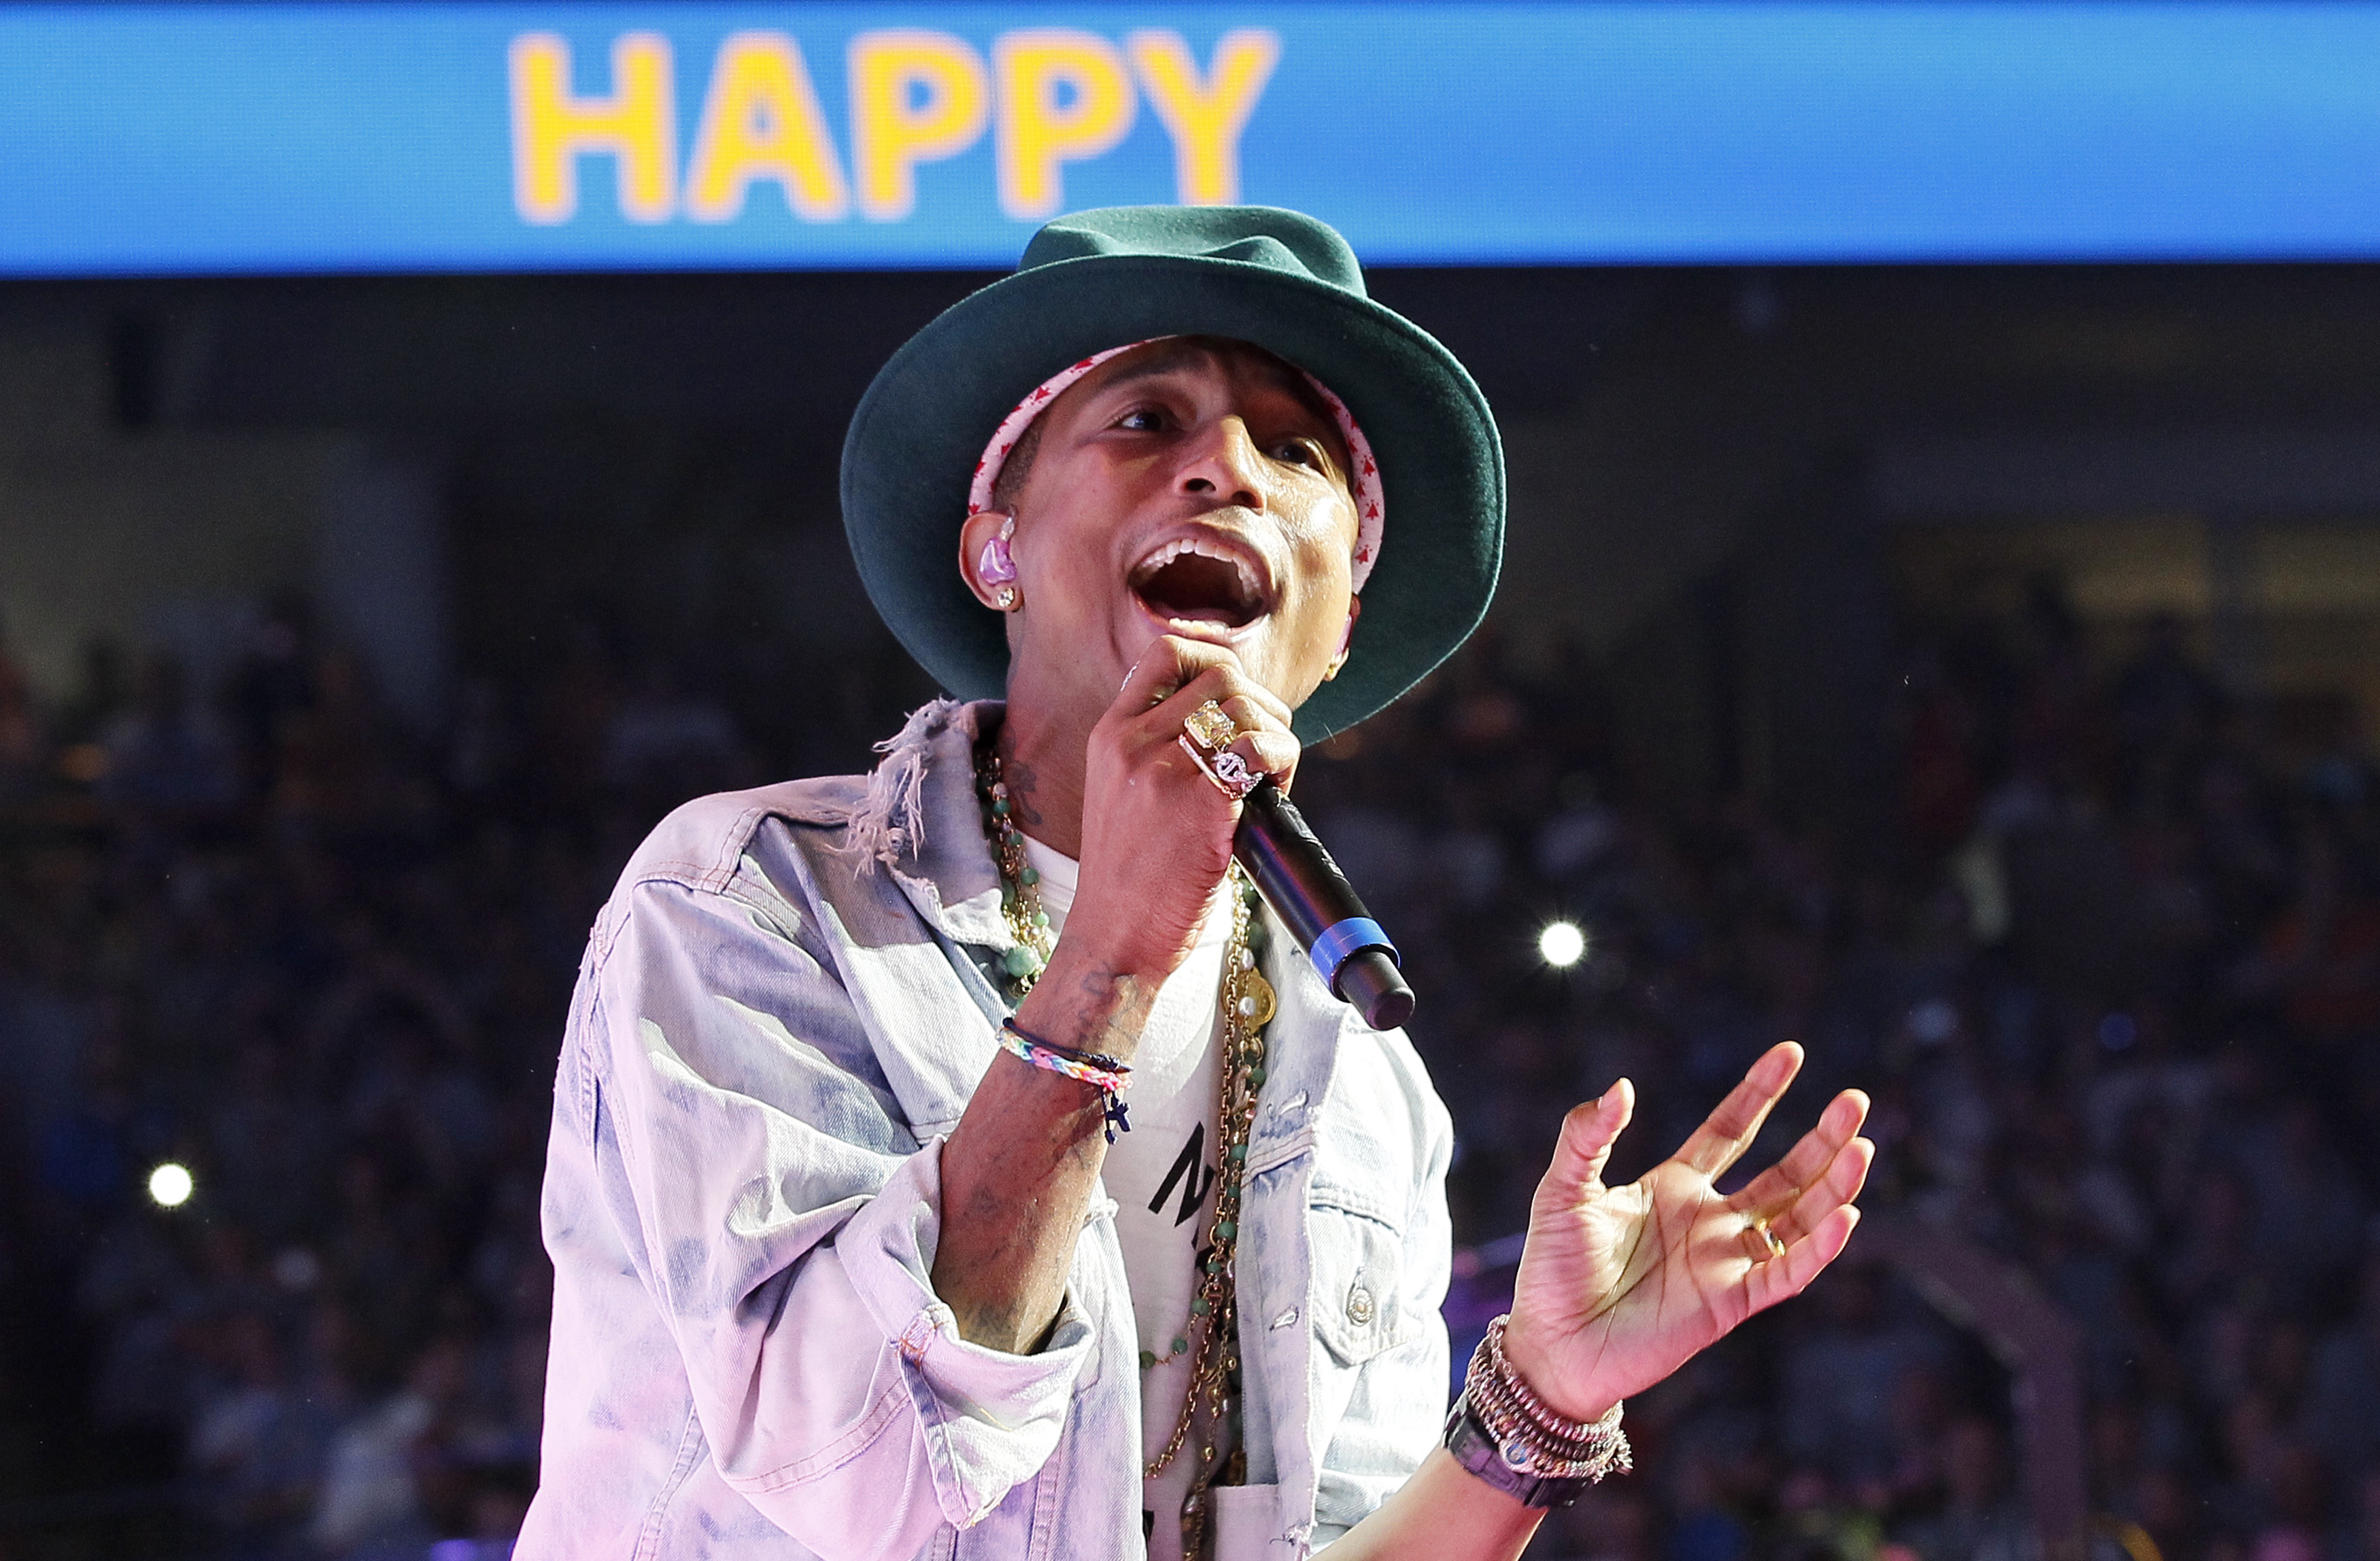 Singer Pharrell Williams performs his hit song 